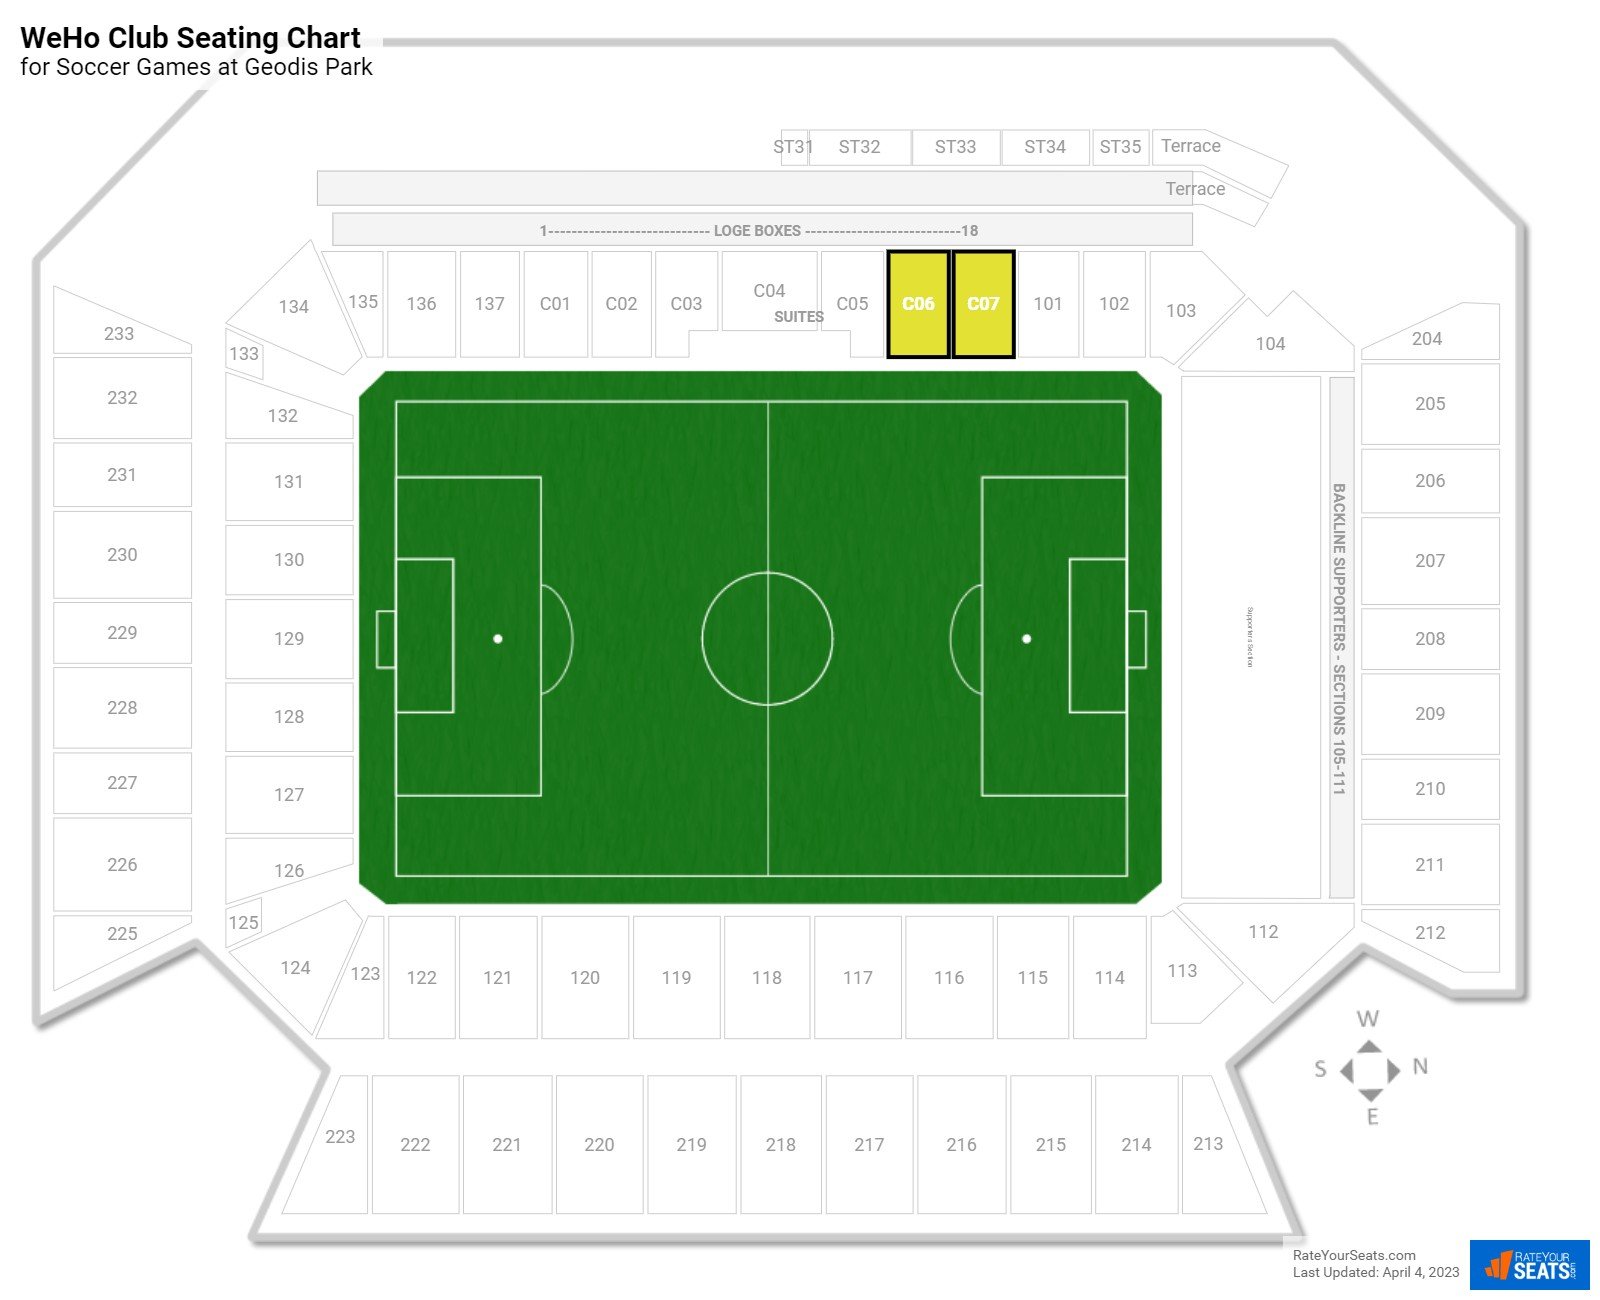 Soccer WeHo Club Seating Chart at Geodis Park